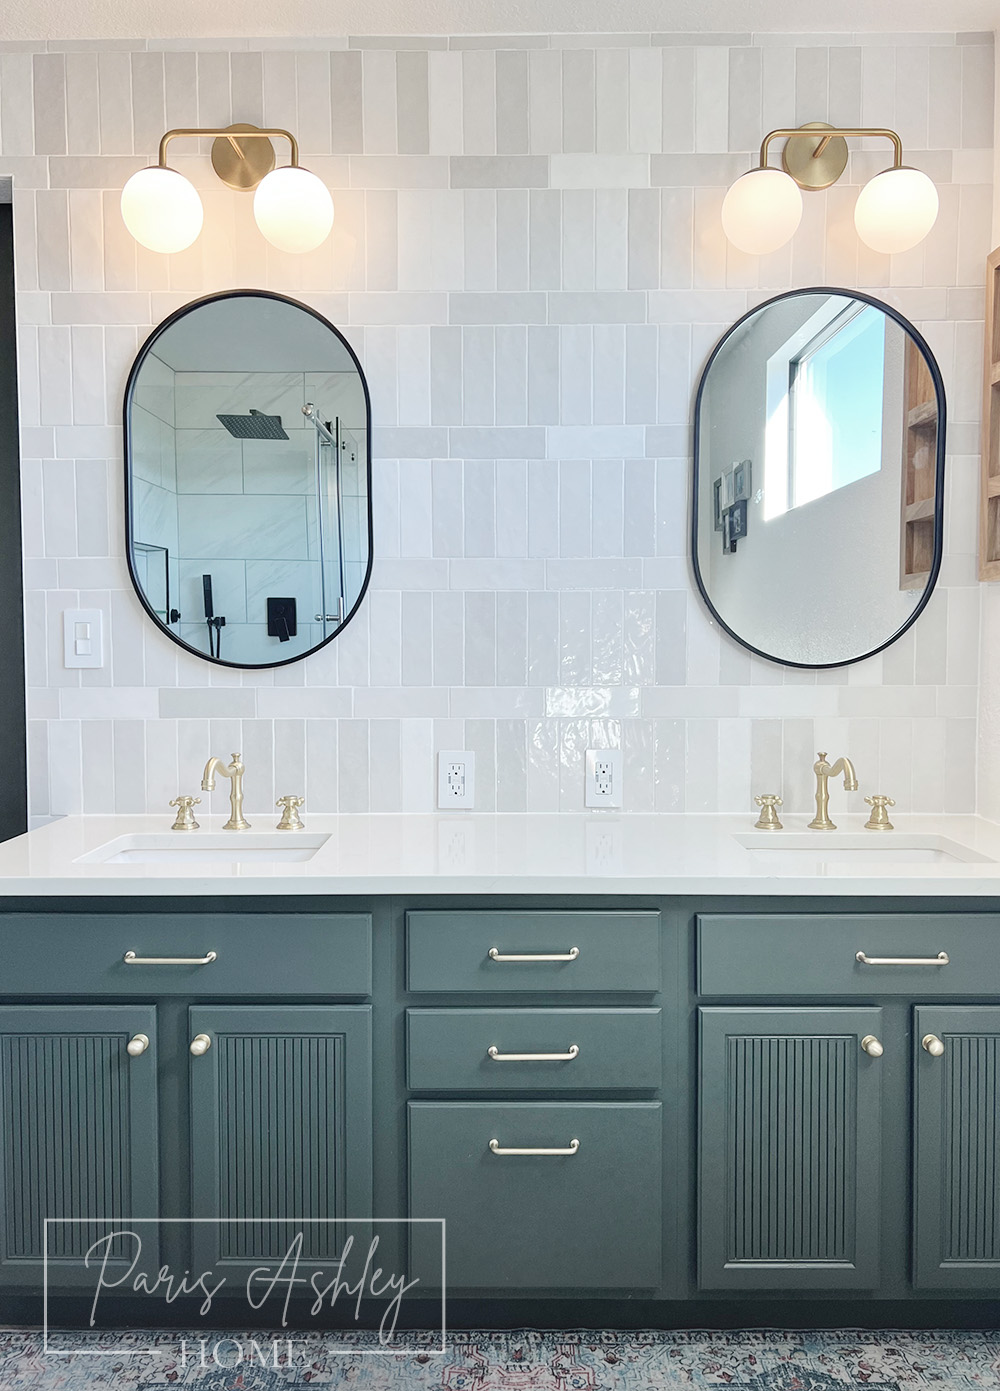 Upgrade Your Vanity Lighting: A Step-by-Step Guide on How to Transform One Vanity Light into Two